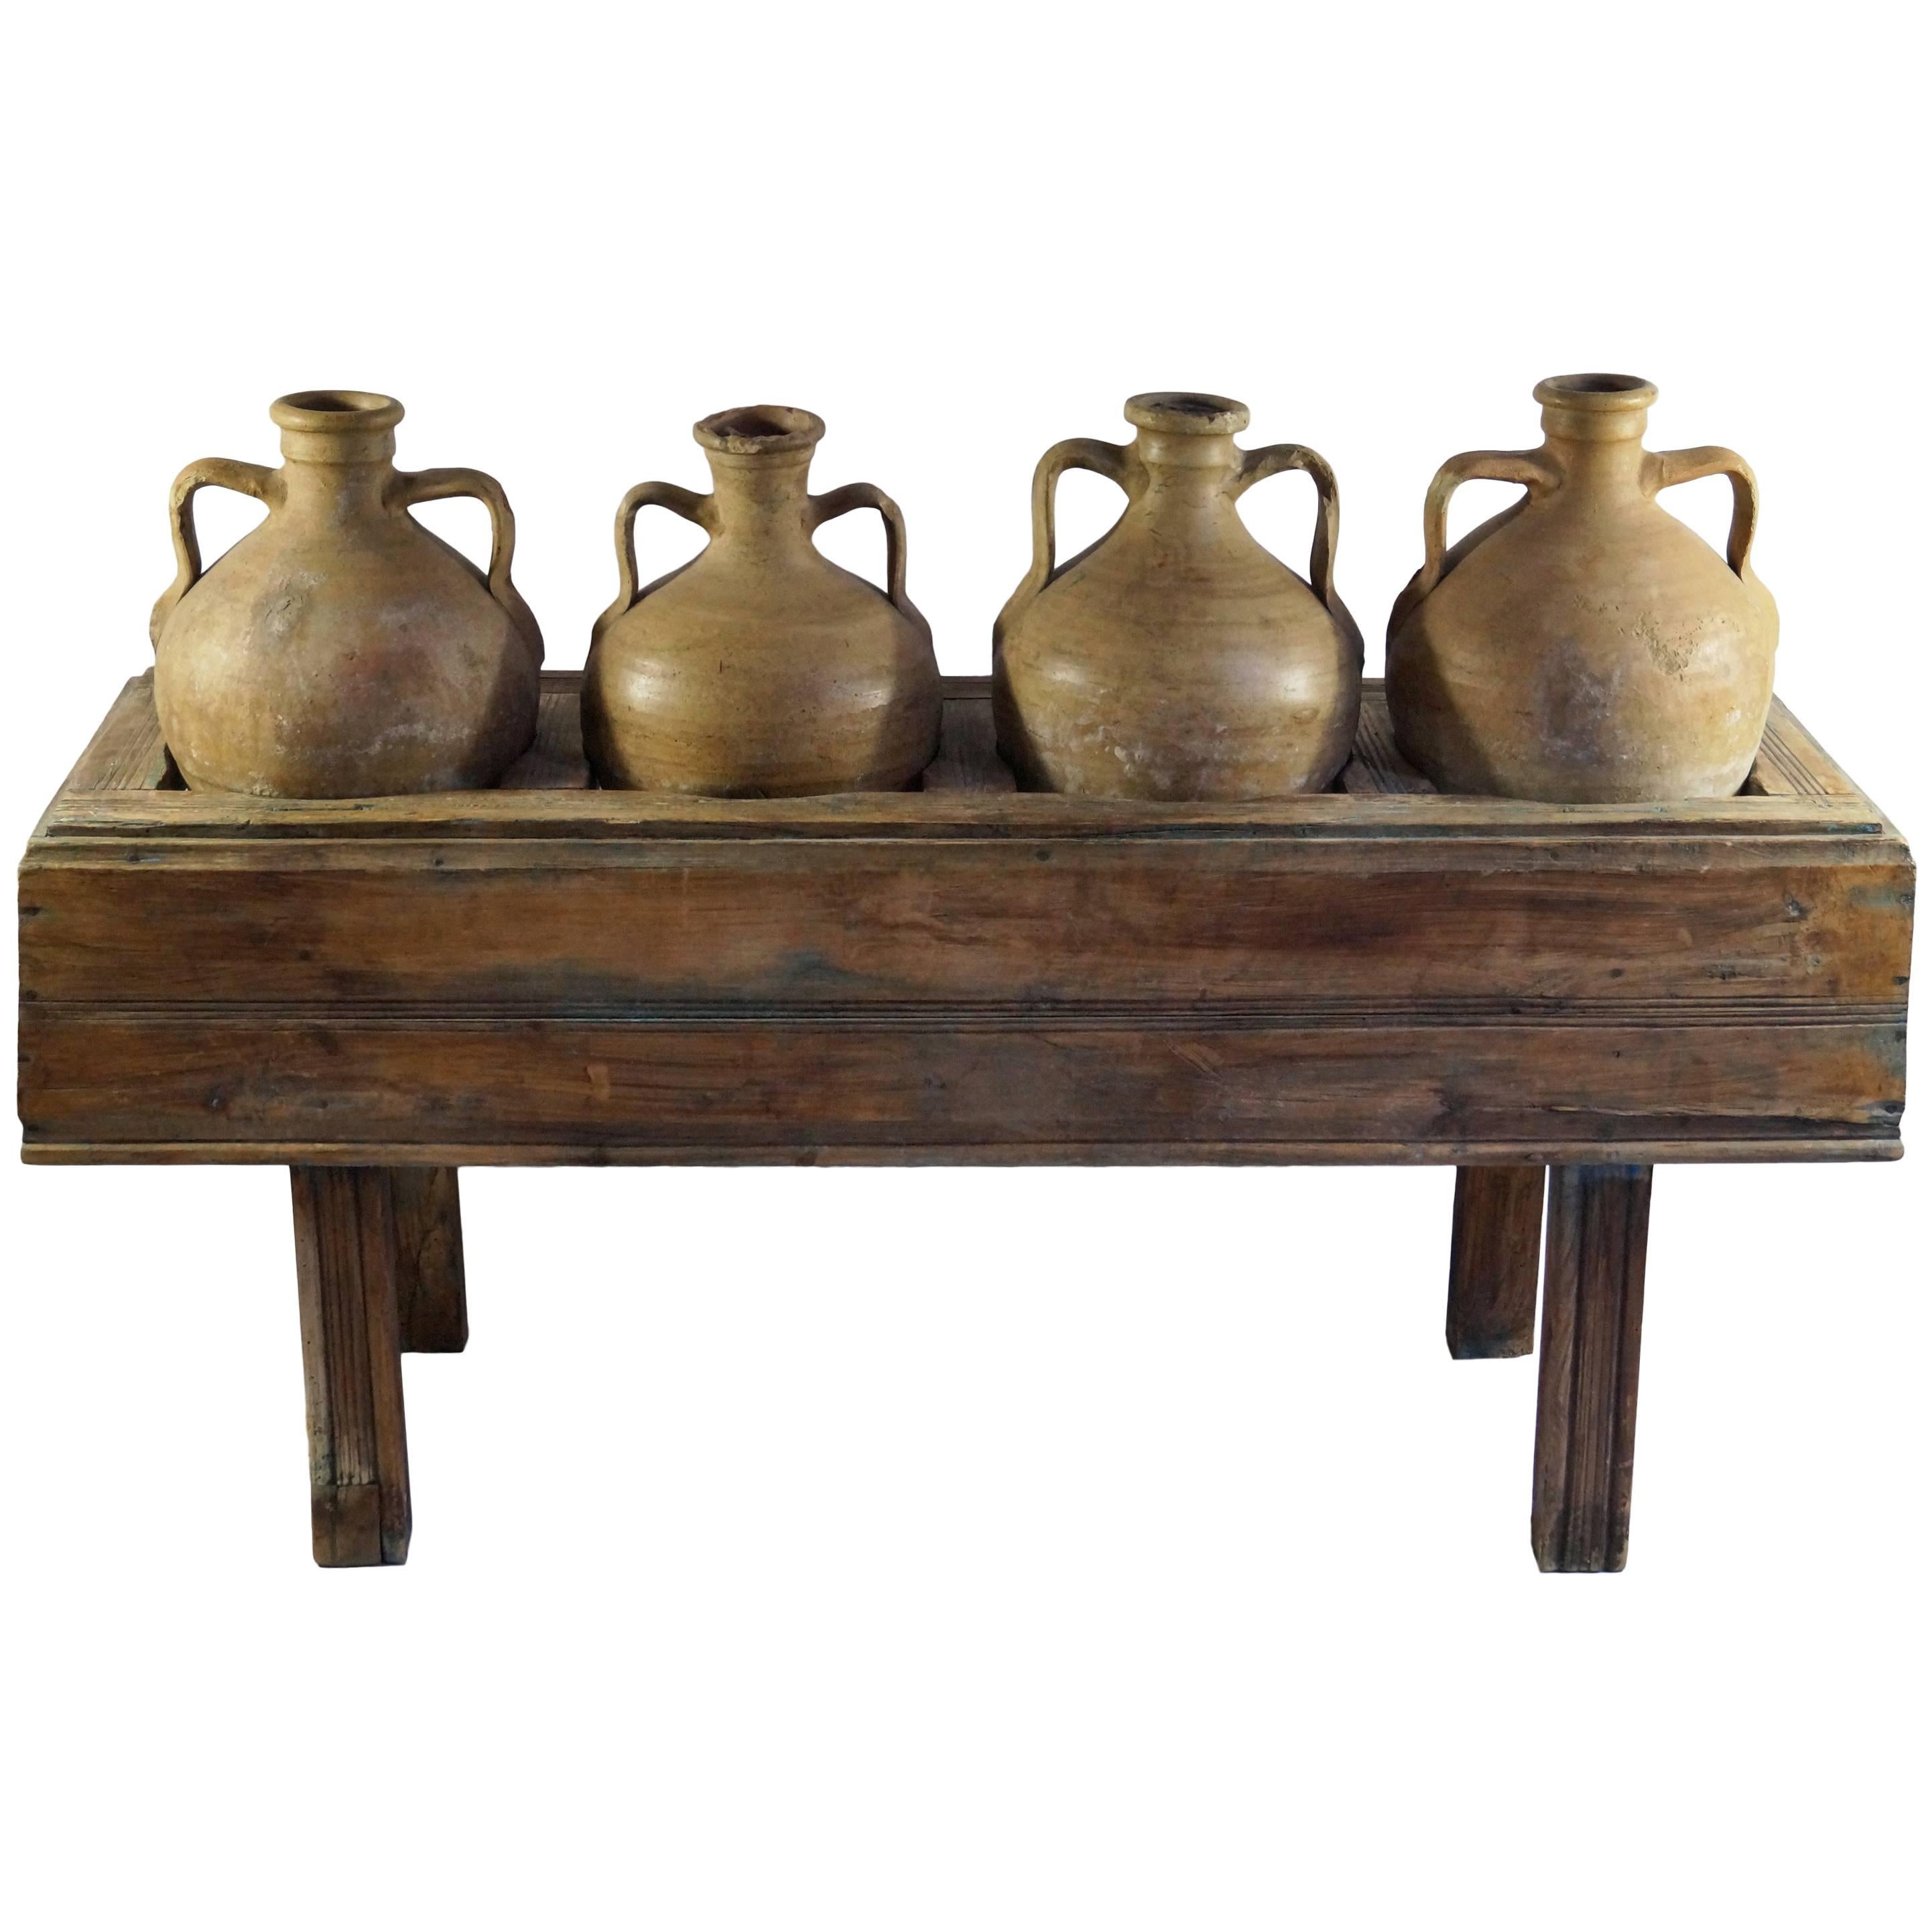 Late 19th Century Italian Table with Four Olive Oil Jars For Sale